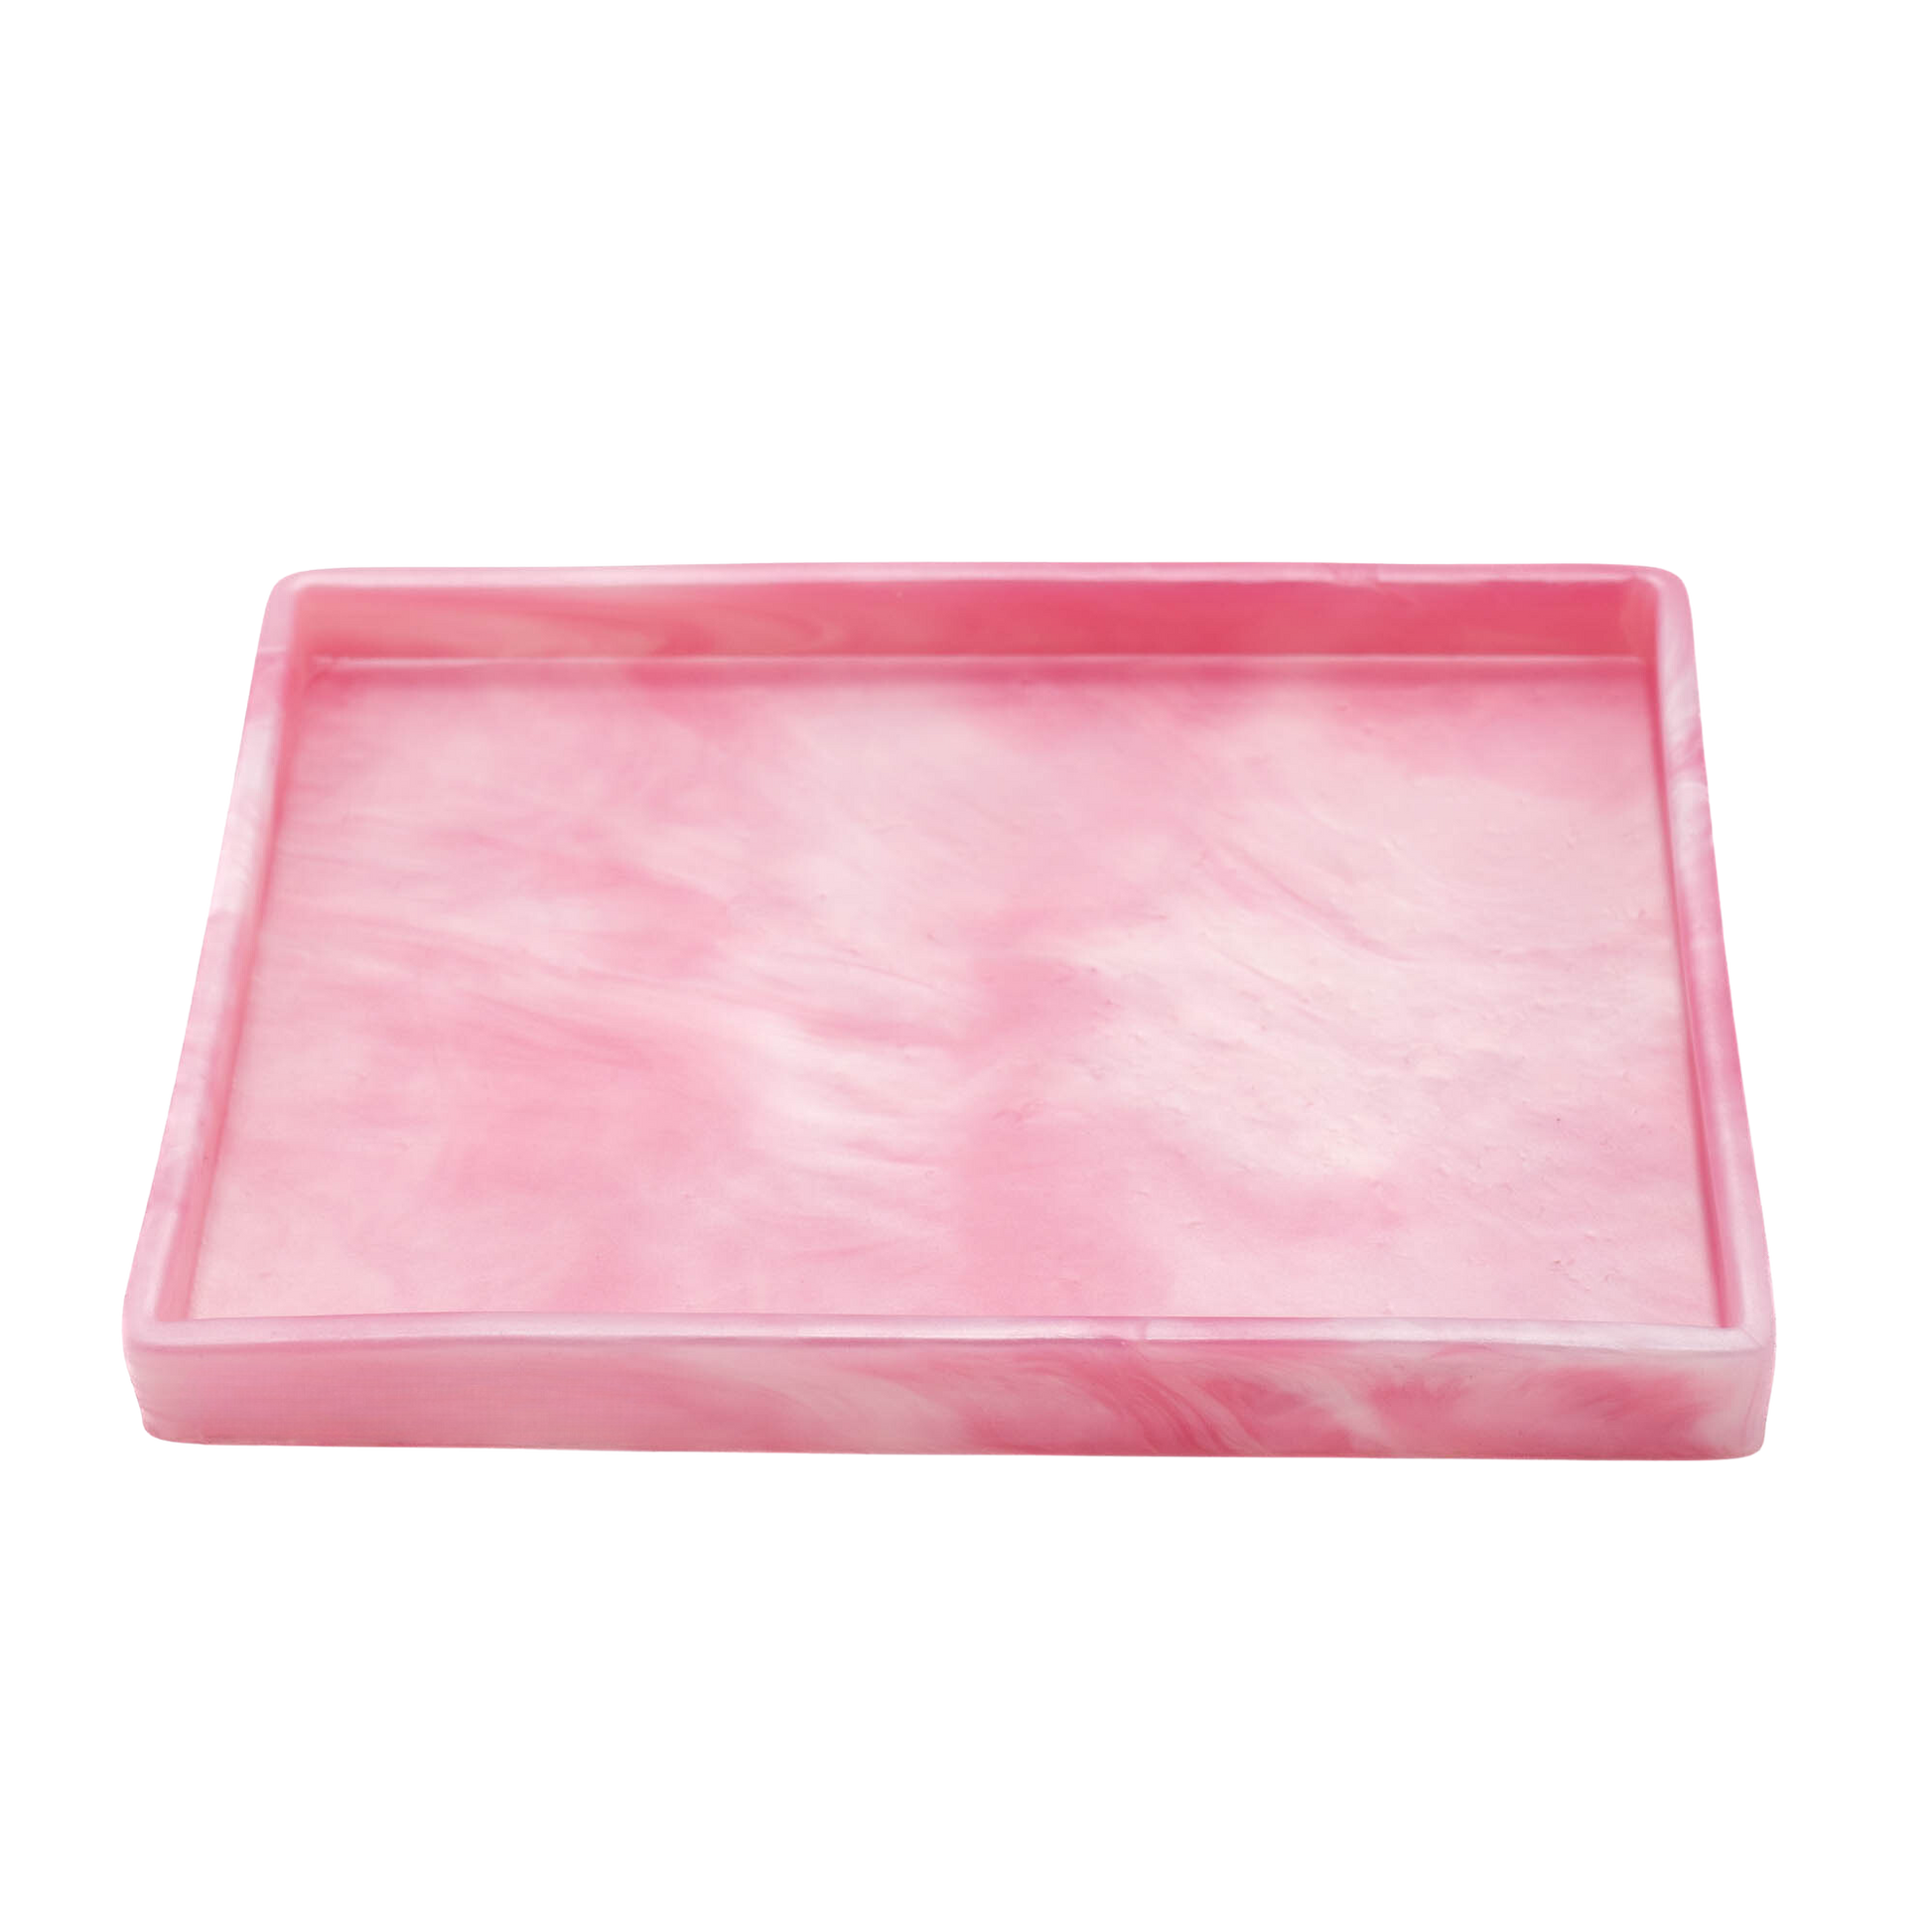 Decorative tray. Our decorative trays are made of platinum-grade silicone. Our decorative trays are heat resistant and dishwasher safe. 